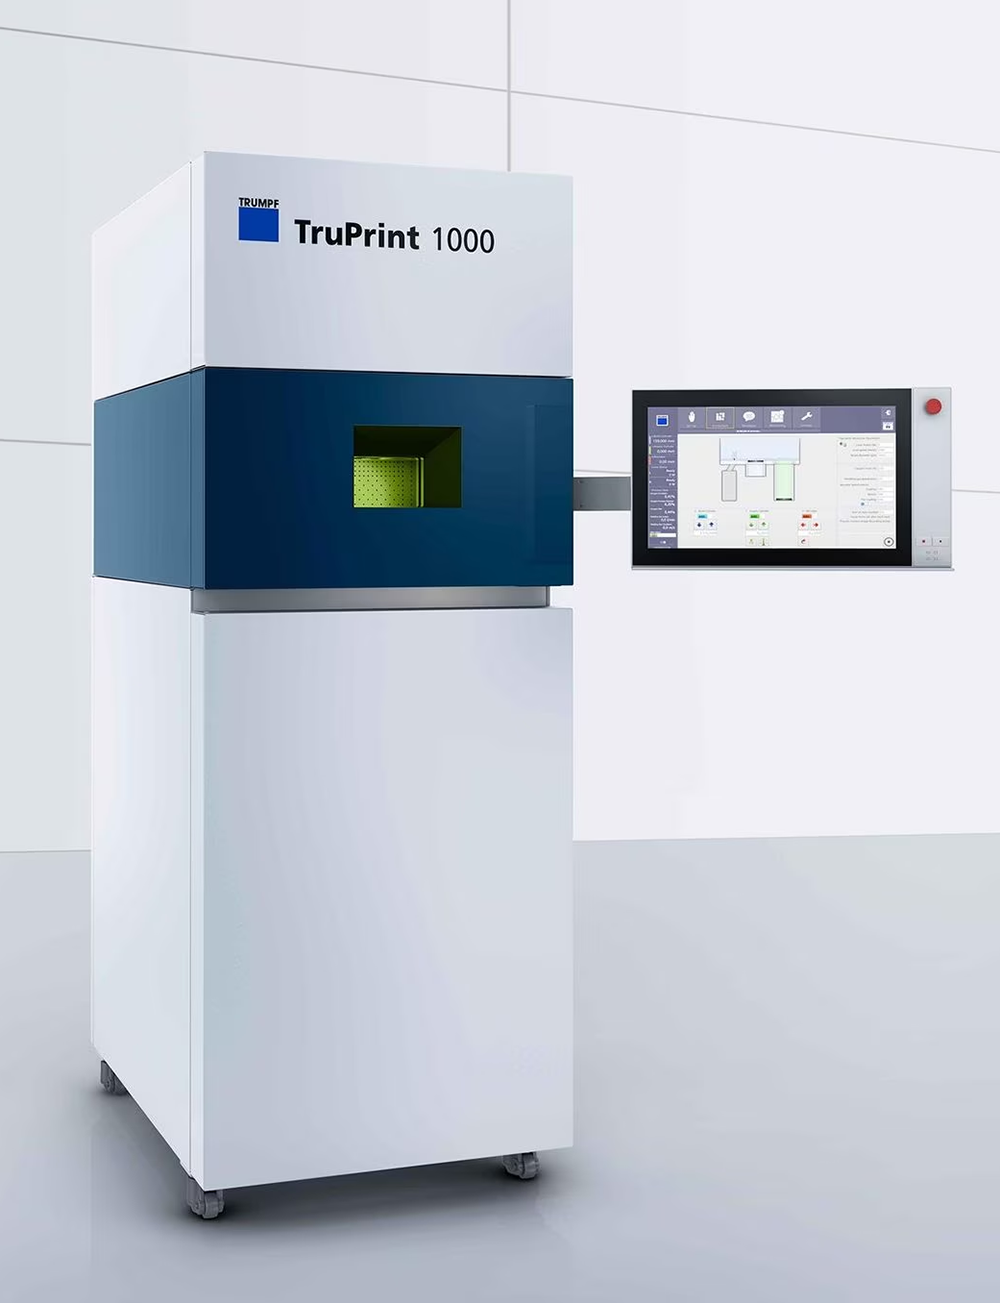 New TruPrint 1000 3D Printer Small is Size, But Designed for Big Capabilities